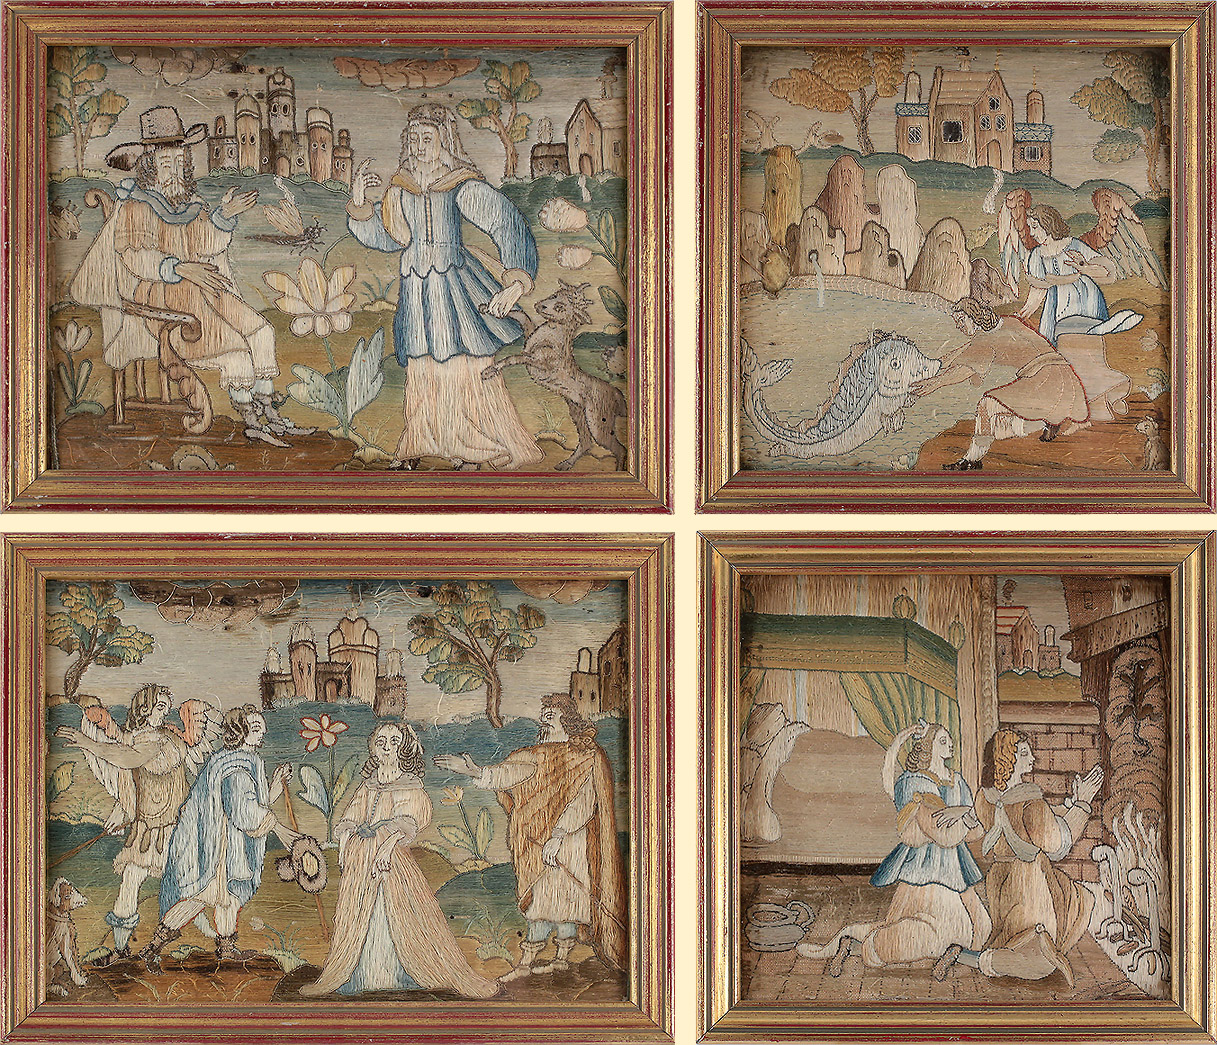 Set of 4 17th century silkwork panels illustrating Tobias, from the Book of Tobit